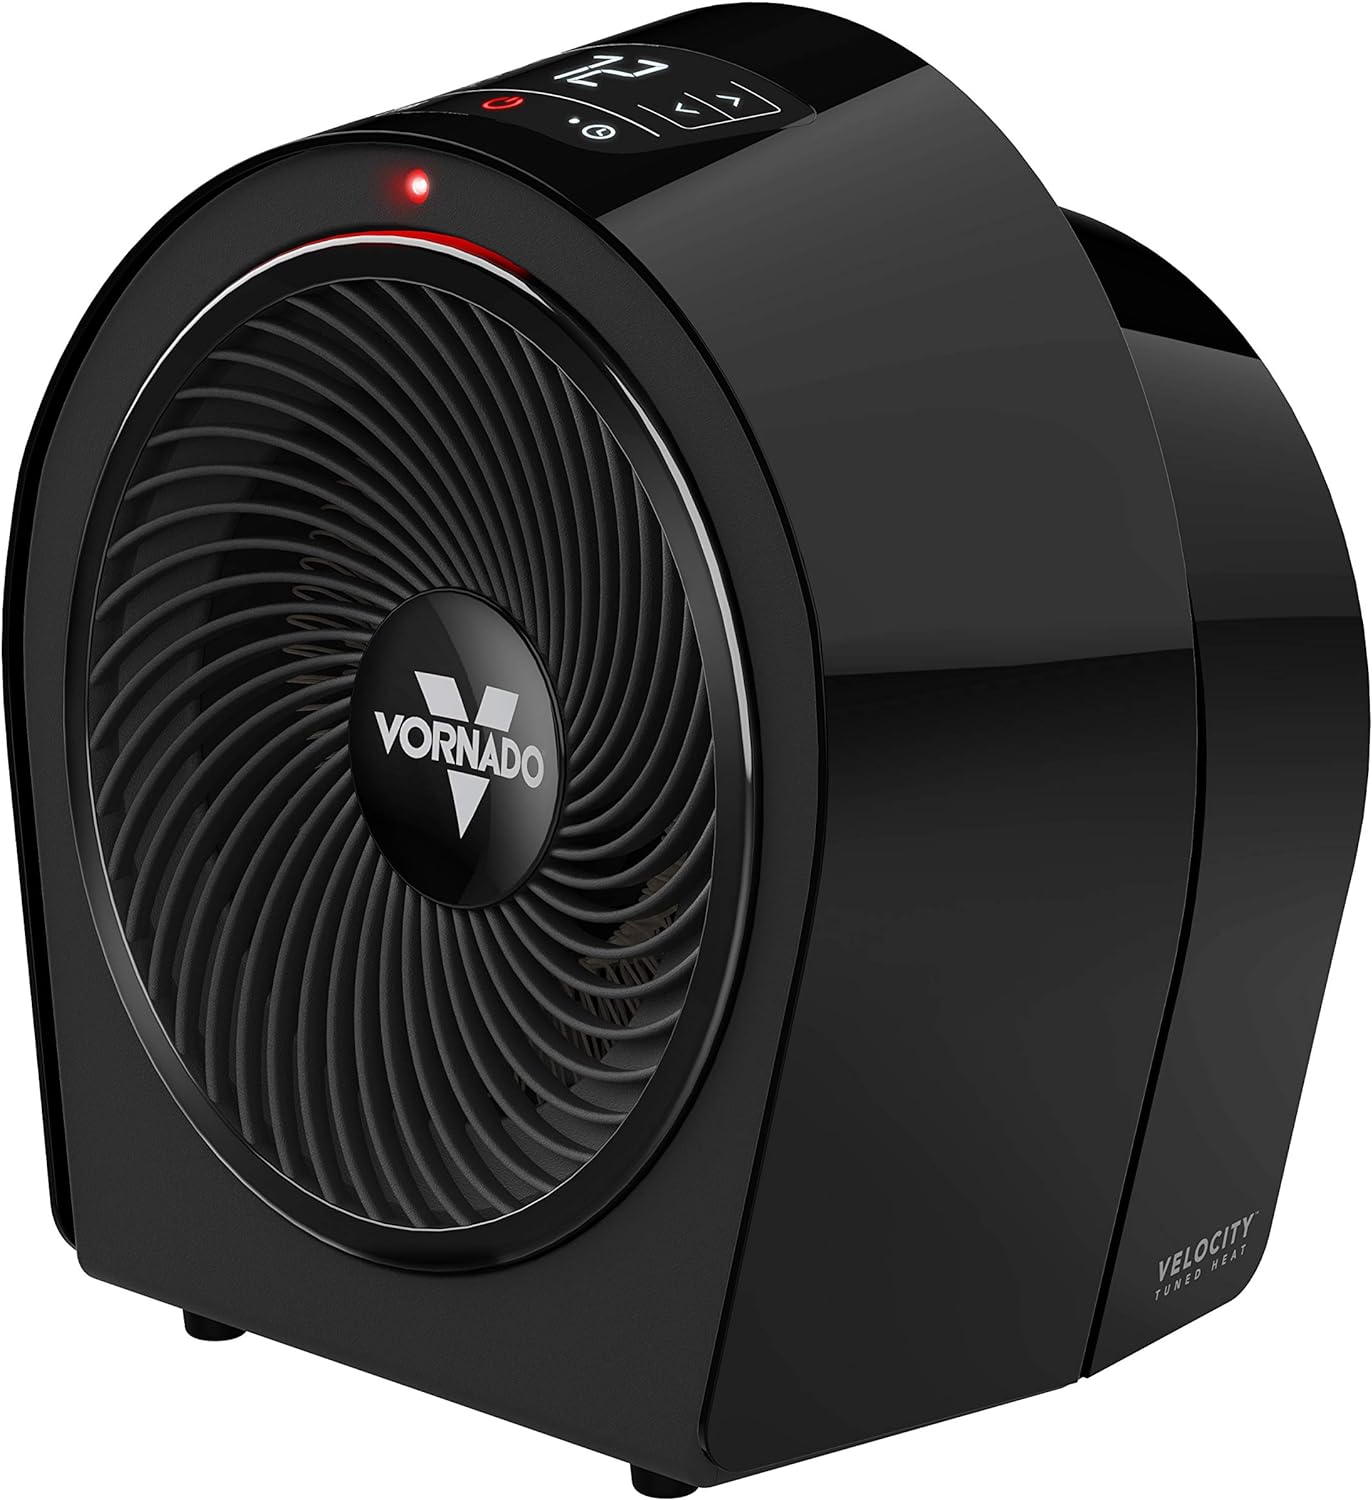 Vornado review 2/10/22Consumer, not paid, just giving a good product and company its due.Well, I cant make this short, but as informative and helpful as possible.I should be a rep. for these heaters,I love them. No other electric heater Ive found (and ALOT of research) heats a space faster & easier.But I must first extend my gratitude for a company that still holds extra service, and stands fully behindtheir product.Their base is in the US, and relating in understandable English is so v